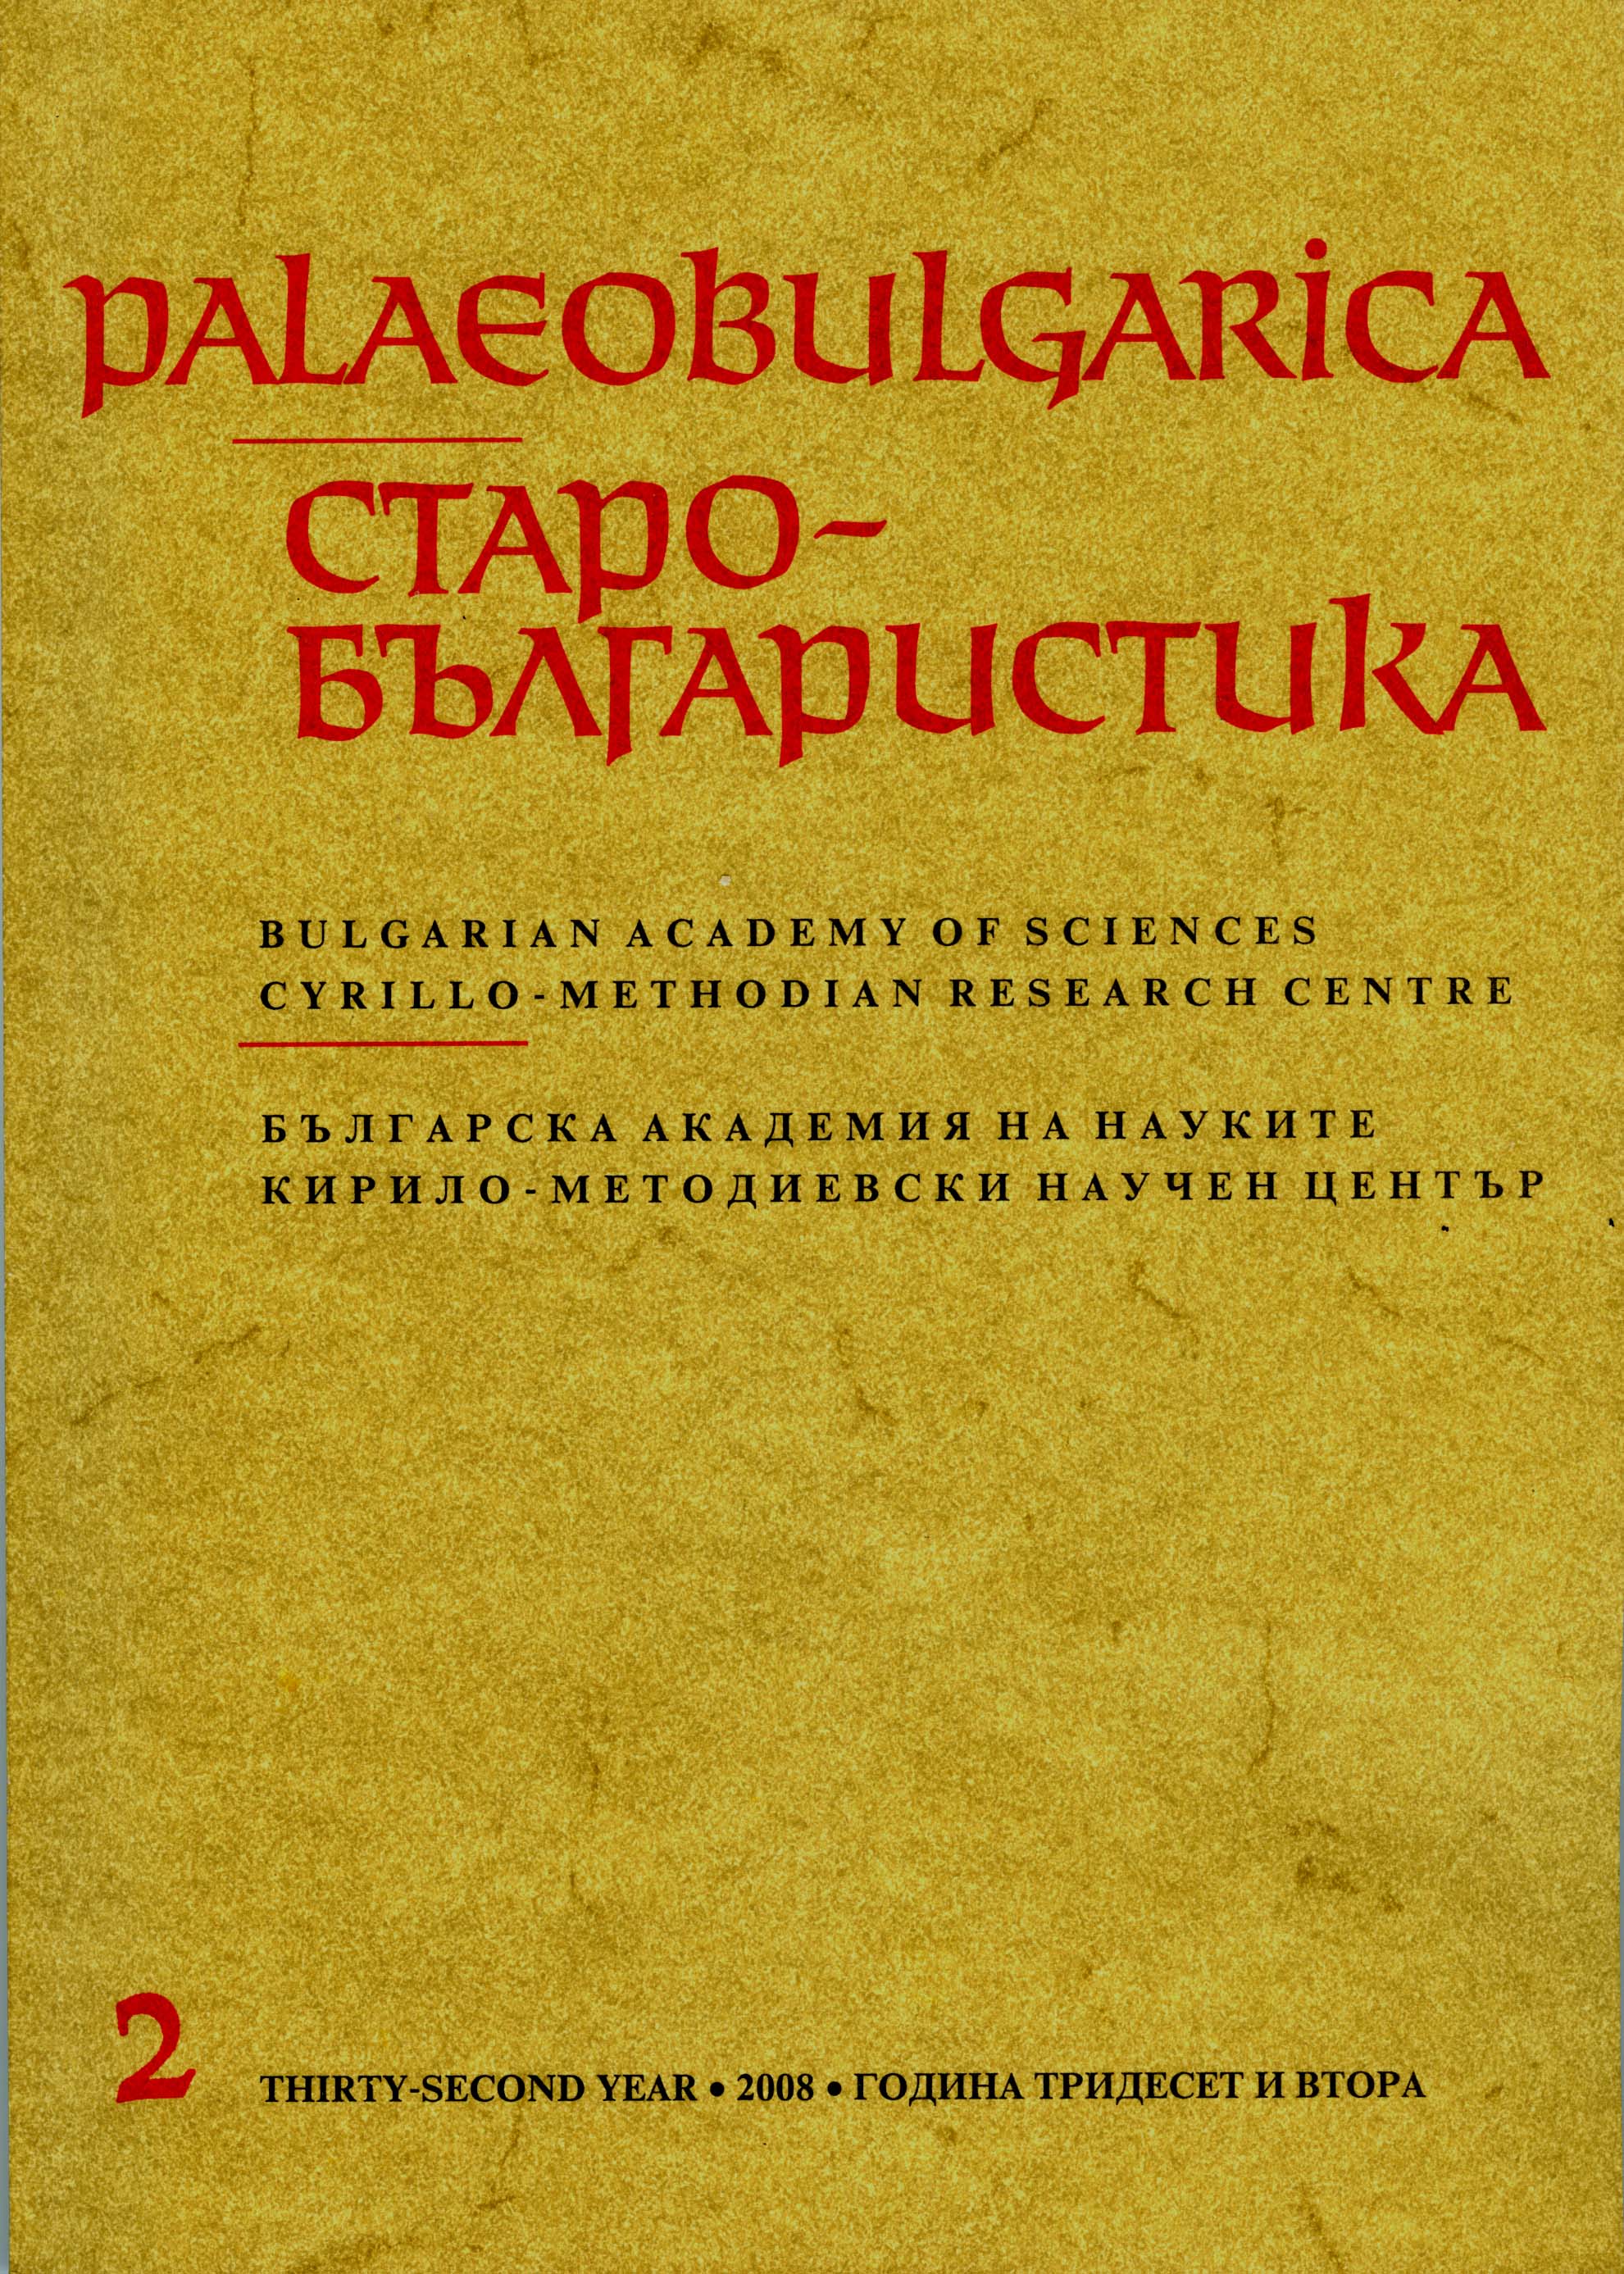 The Round Table on the Subject “Western Bulgaria and Eastern Slavs” Cover Image